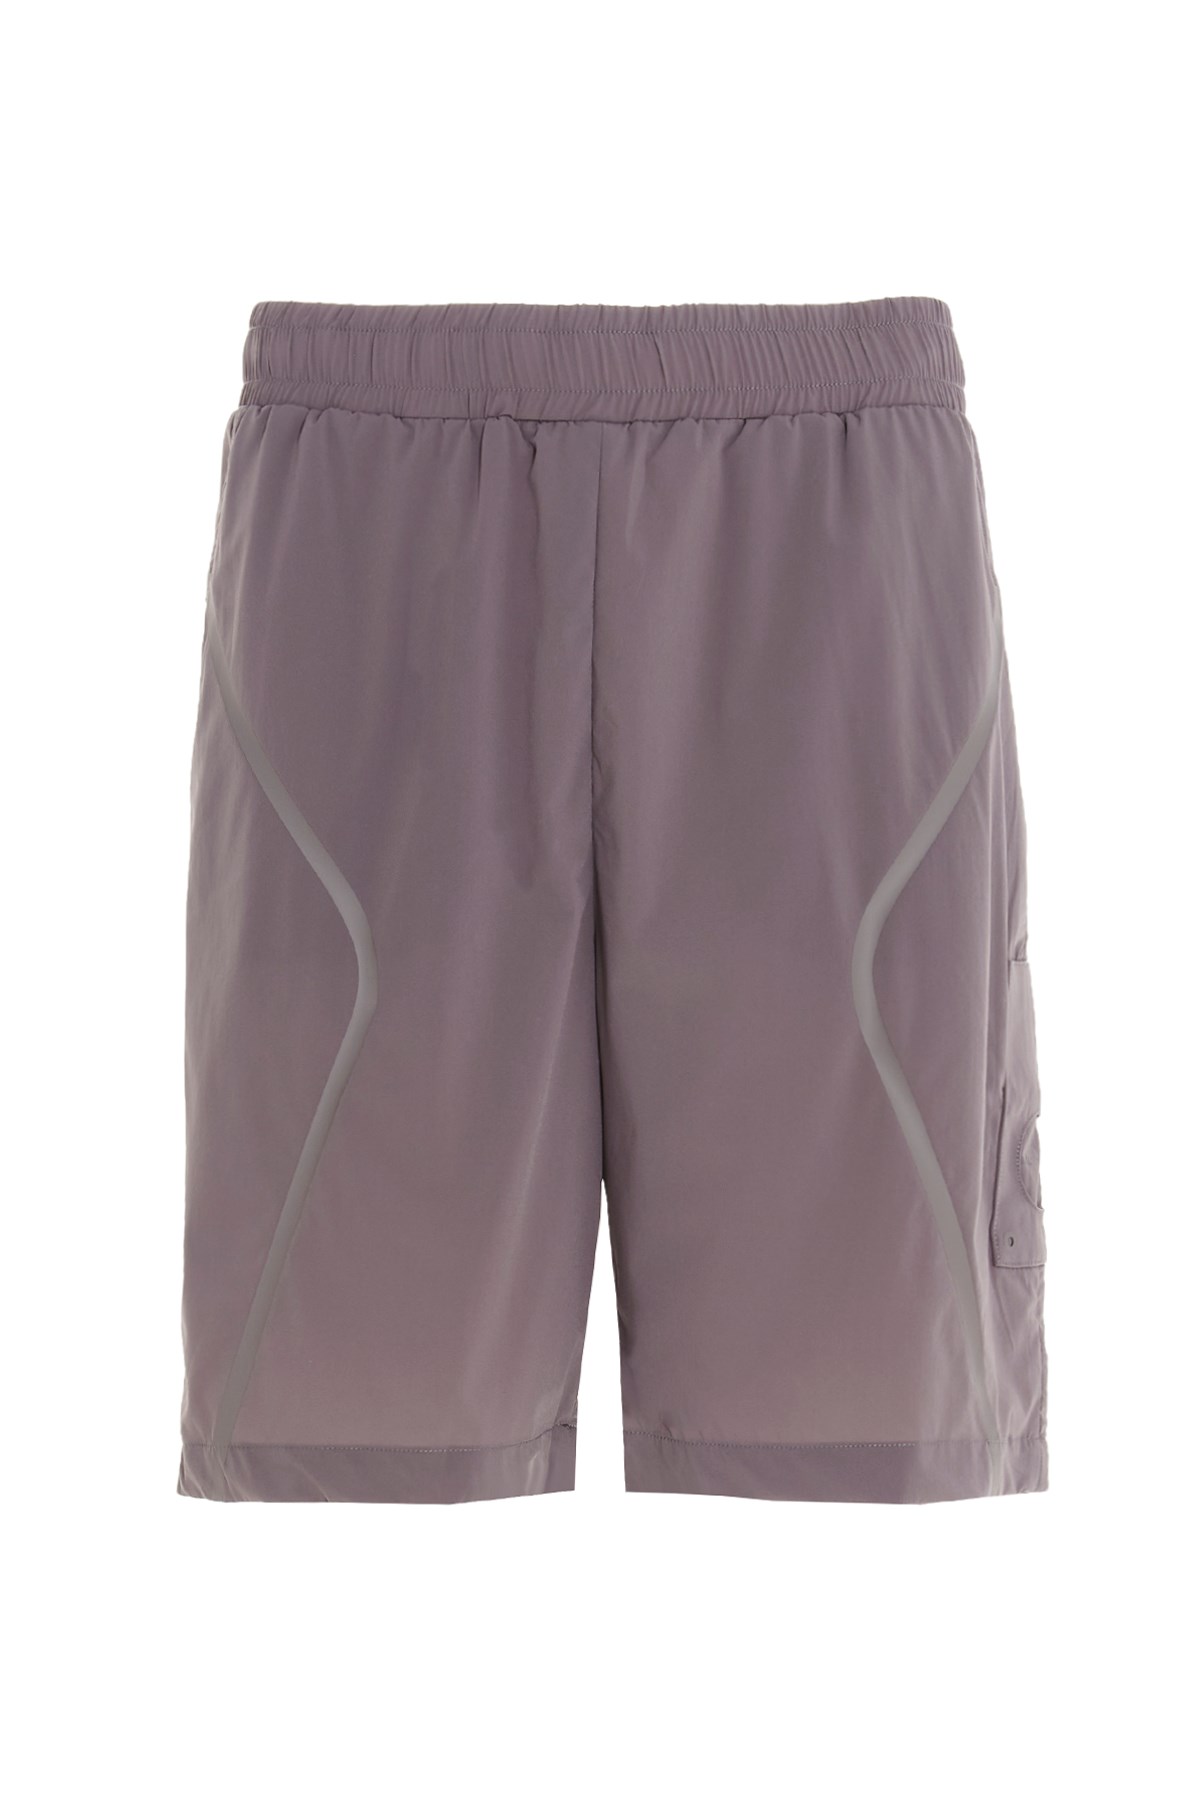 A-COLD-WALL* Bermuda-Shorts 'Welded'